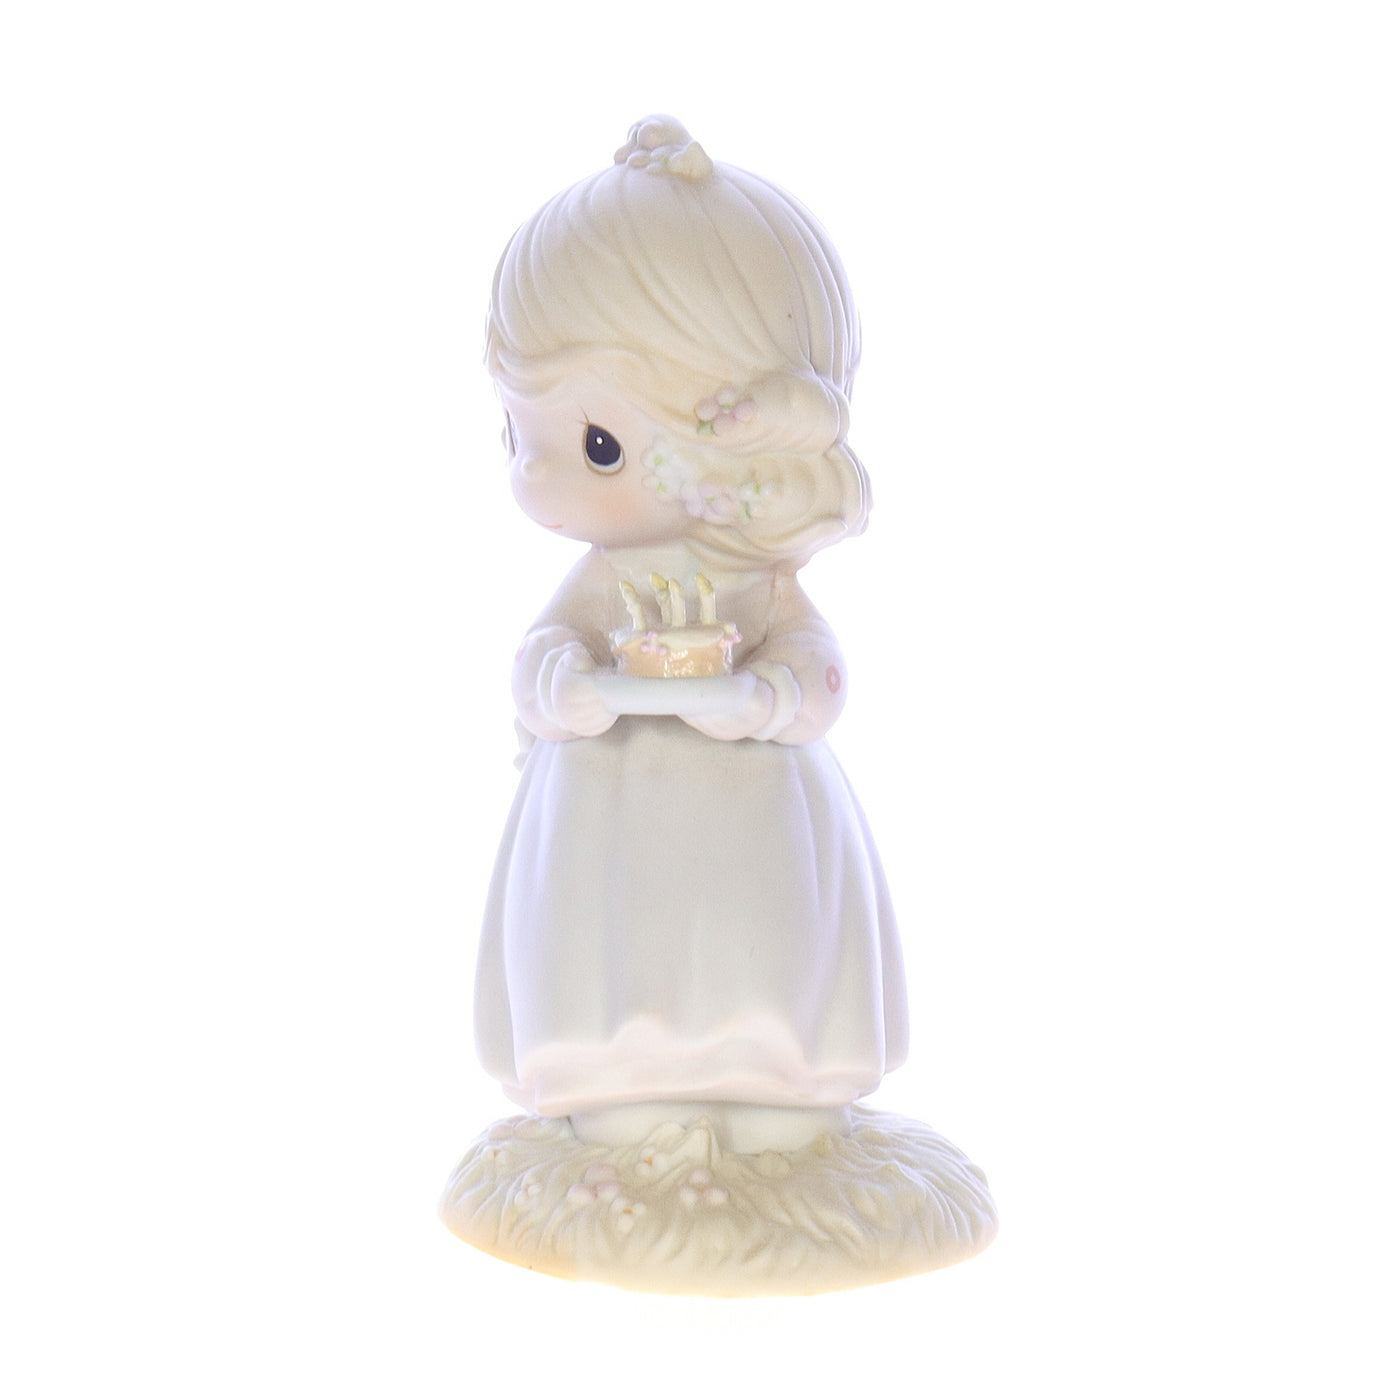 Precious_Moments_524301_May_Your_Birthday_Be_A_Blessing_Birthday_Figurine_1990_Box Front Left View